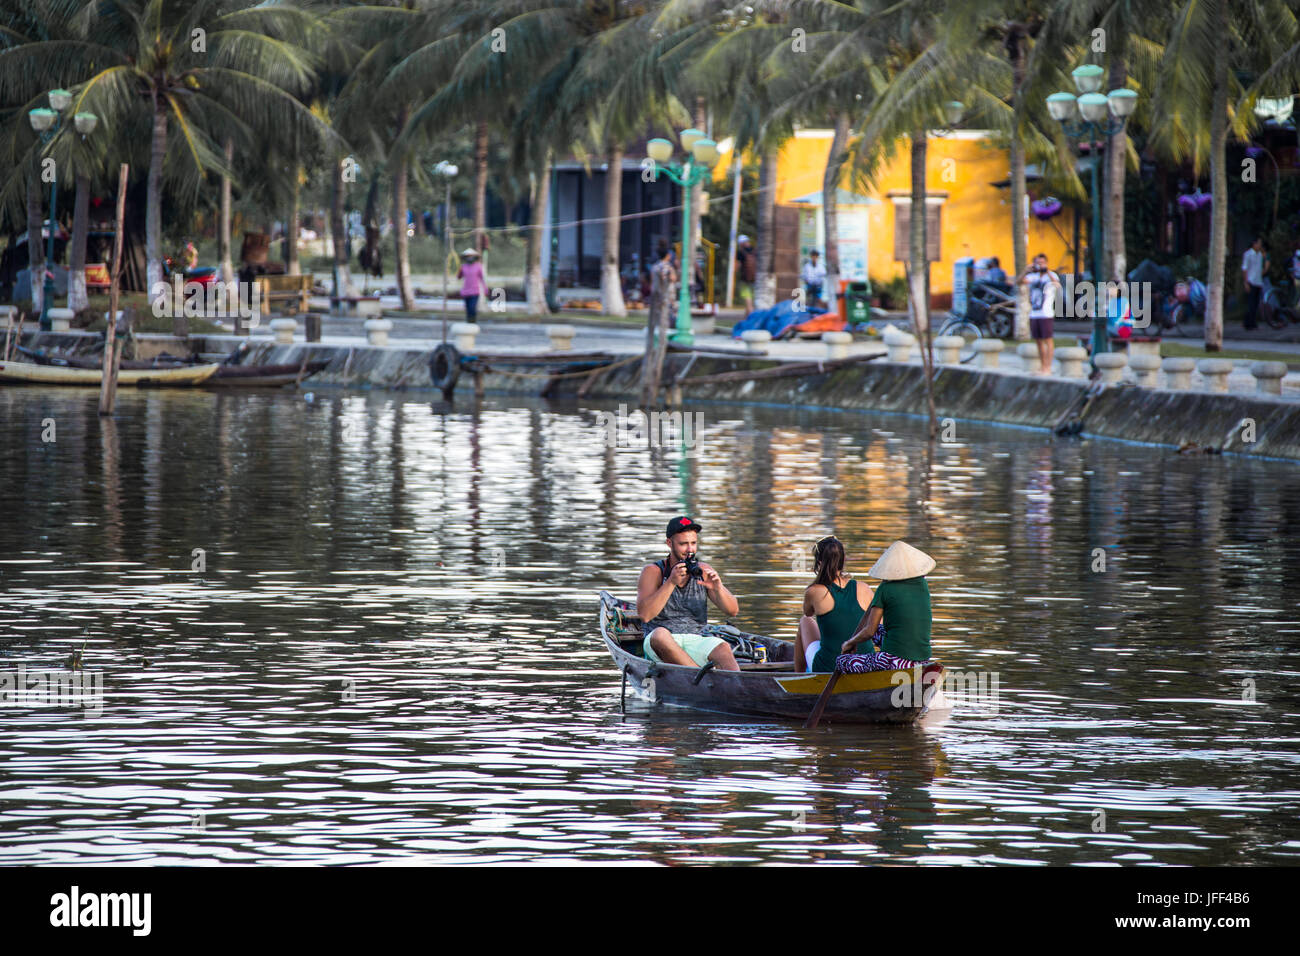 Tourists in a rowboat on the Thu Bon River in Hoi An, Vietnam Stock Photo